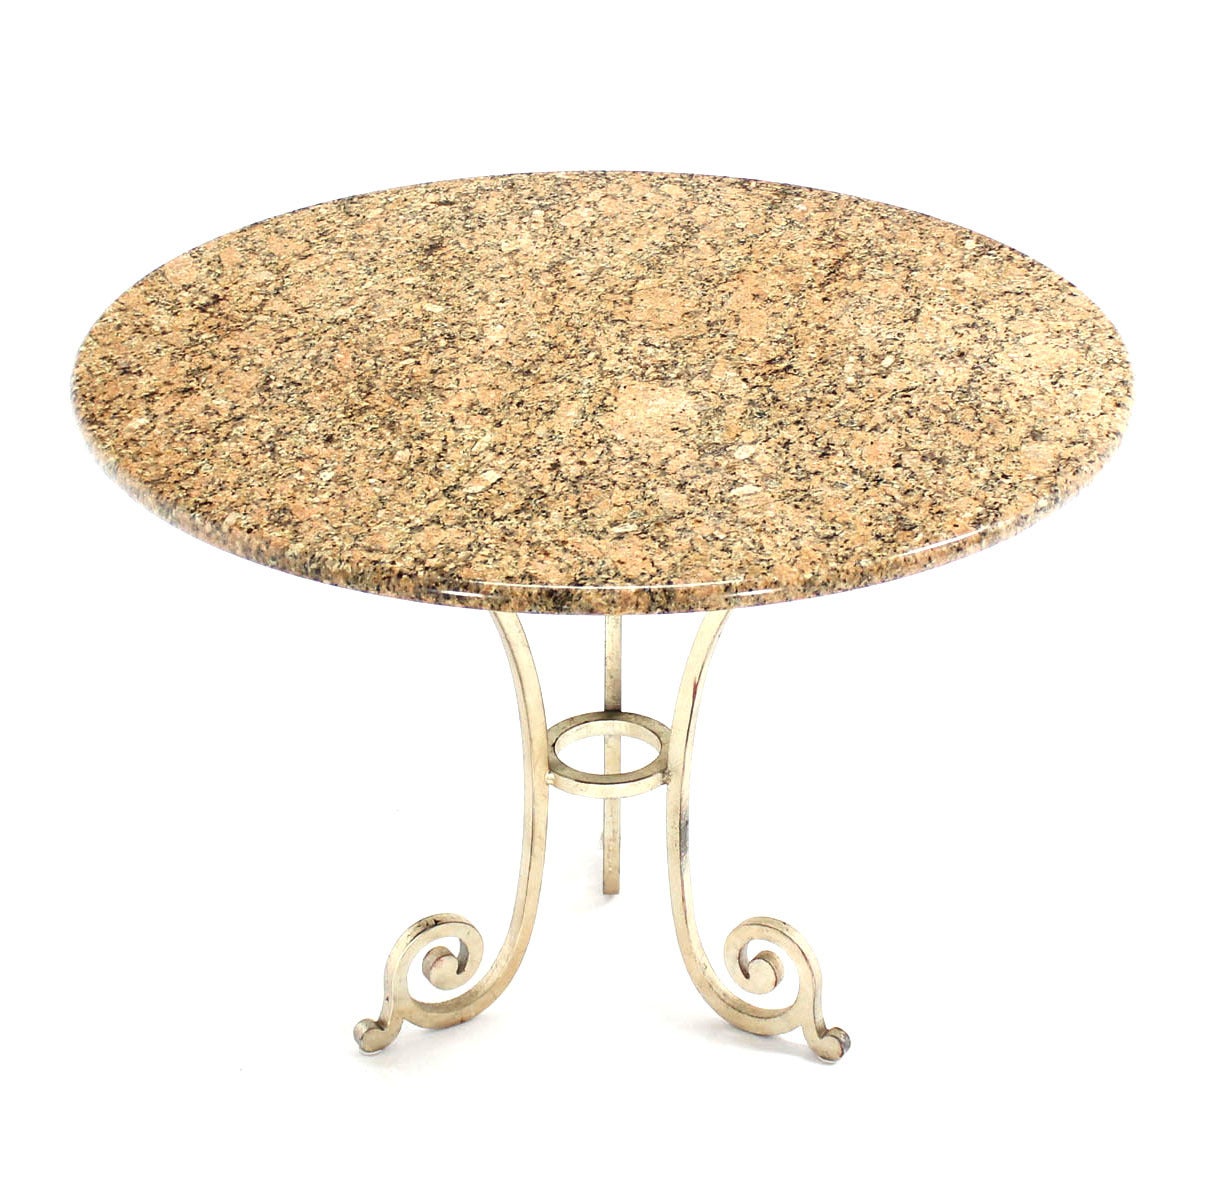 Nice heavy iron base thick granite top guardian or center table.